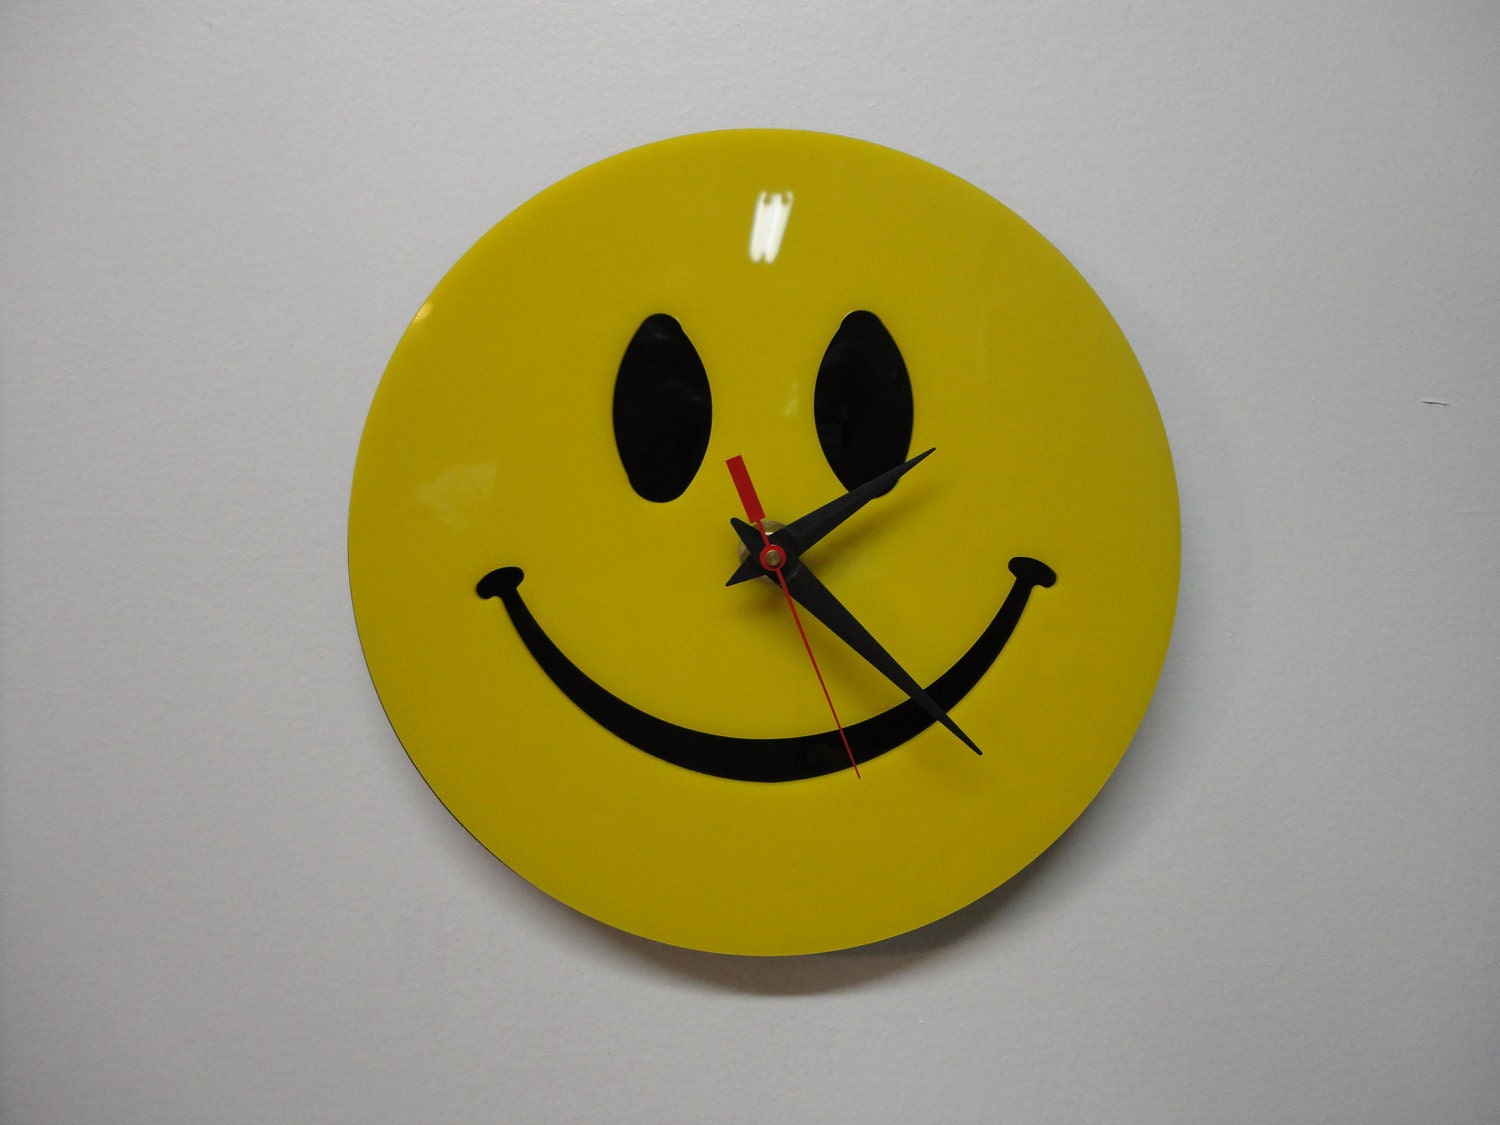 Items Similar To Yellow Smiley Face Wall Clock On Etsy